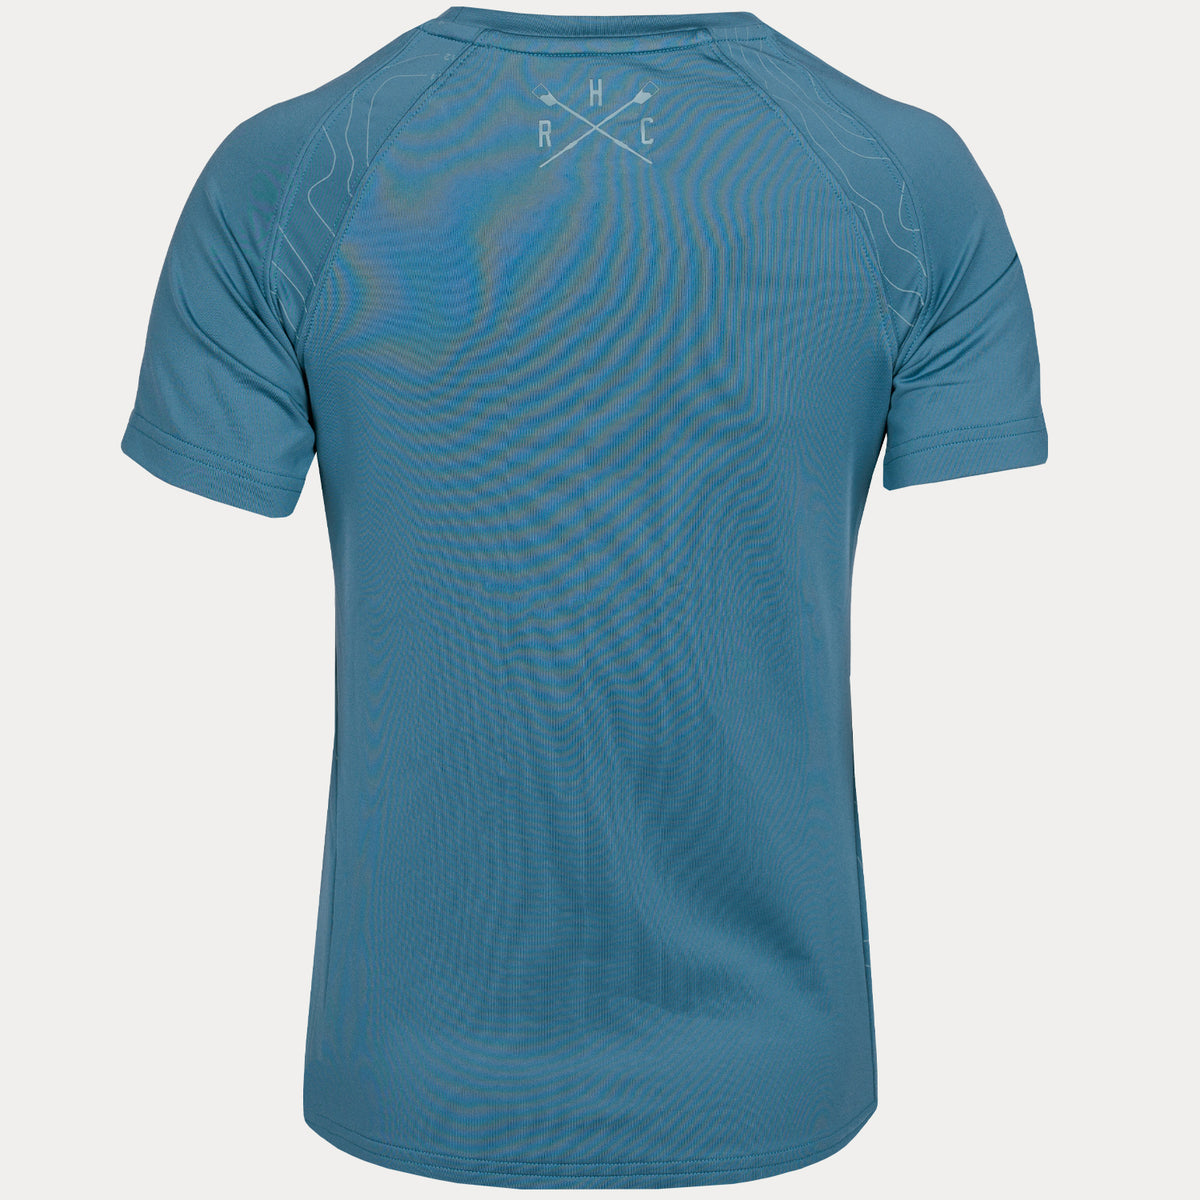 rear view of moisture wicking compression tee in gray with hrc crossed oar logo between shoulders